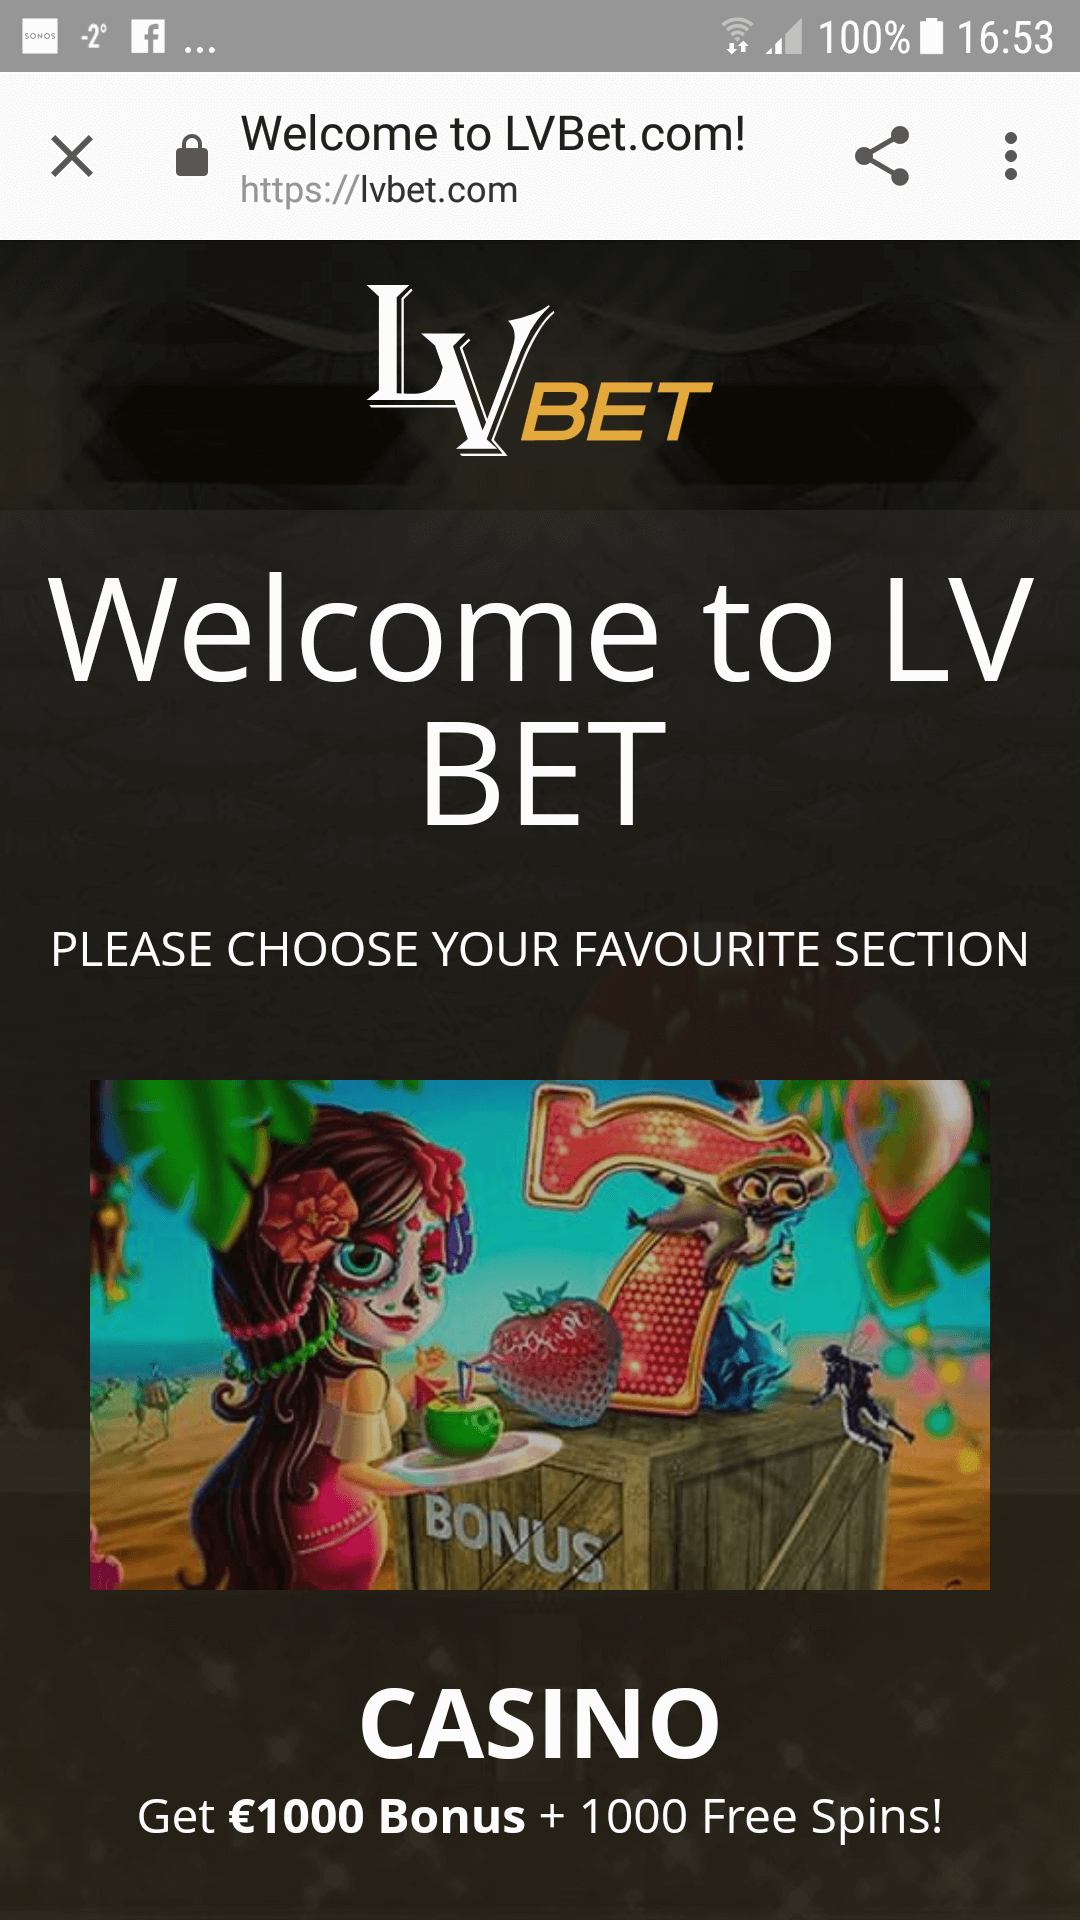 LVBet Casino Review (2020) - Accredited | Casinomeister